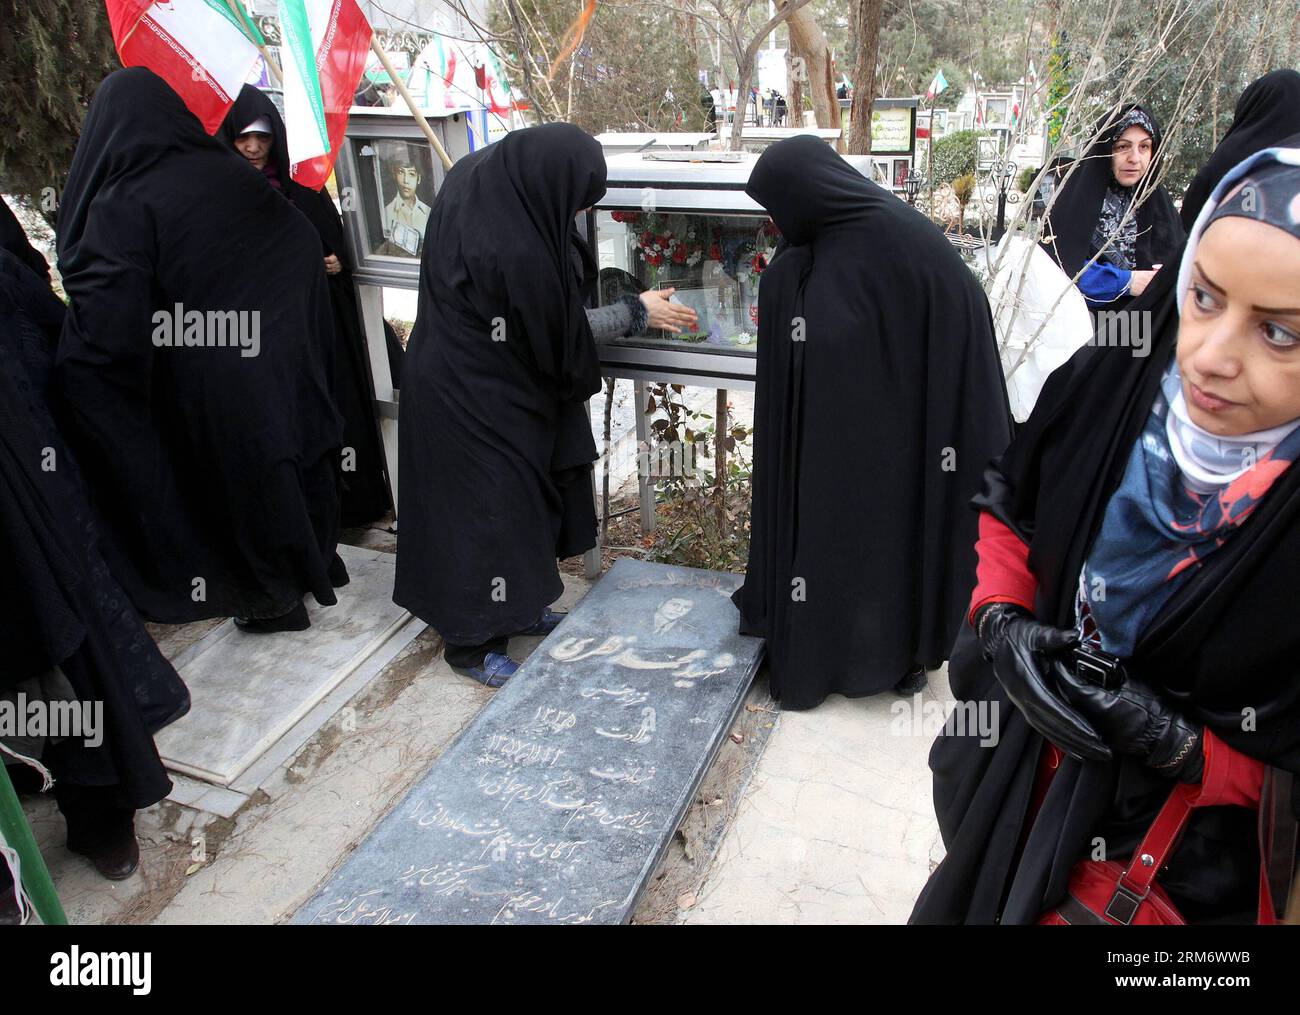 TEHRAN, (Xinhua) -- Iranian women visit the graves of people who were killed during the 1979 Islamic revolution at the Behesht-e Zahra cemetery outside Tehran, Iran, on Feb. 1, 2014, to mark the 35th anniversary of the Islamic revolution. (Xinhua/AhmadHalabisaz) IRAN-TEHRAN-ISLAMIC REVOLUTION-ANNIVERSARY-CEMETERY PUBLICATIONxNOTxINxCHN   TEHRAN XINHUA Iranian Women Visit The Graves of Celebrities Who Were KILLED during The 1979 Islamic Revolution AT The Behesht e Zahra Cemetery outside TEHRAN Iran ON Feb 1 2014 to Mark The 35th Anniversary of The Islamic Revolution XINHUA  Iran TEHRAN Islamic Stock Photo